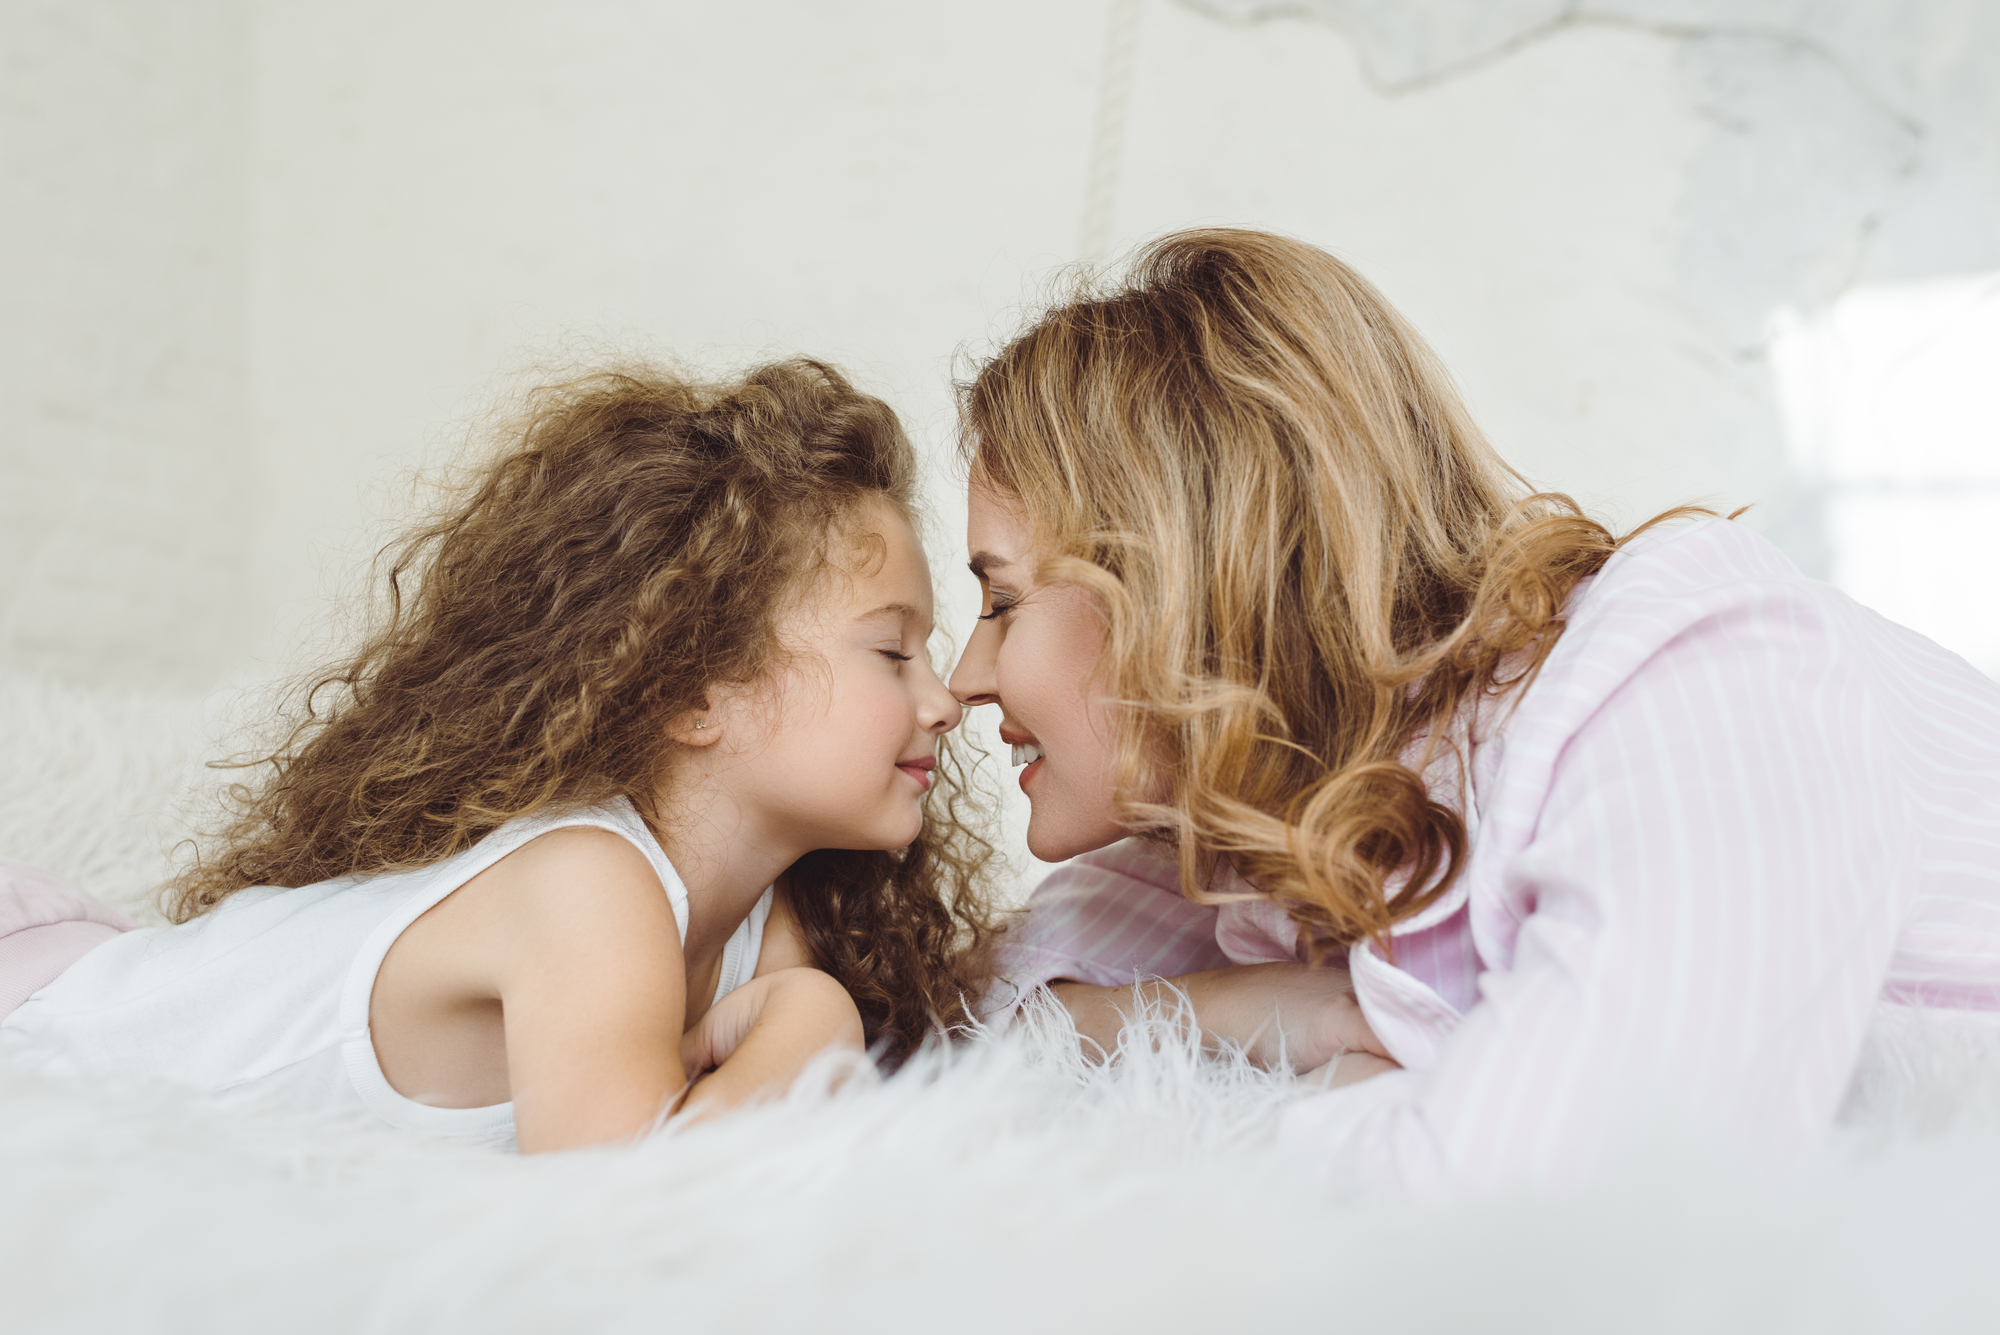 How to Be the Mom Your Strong-Willed Child Needs You to Be